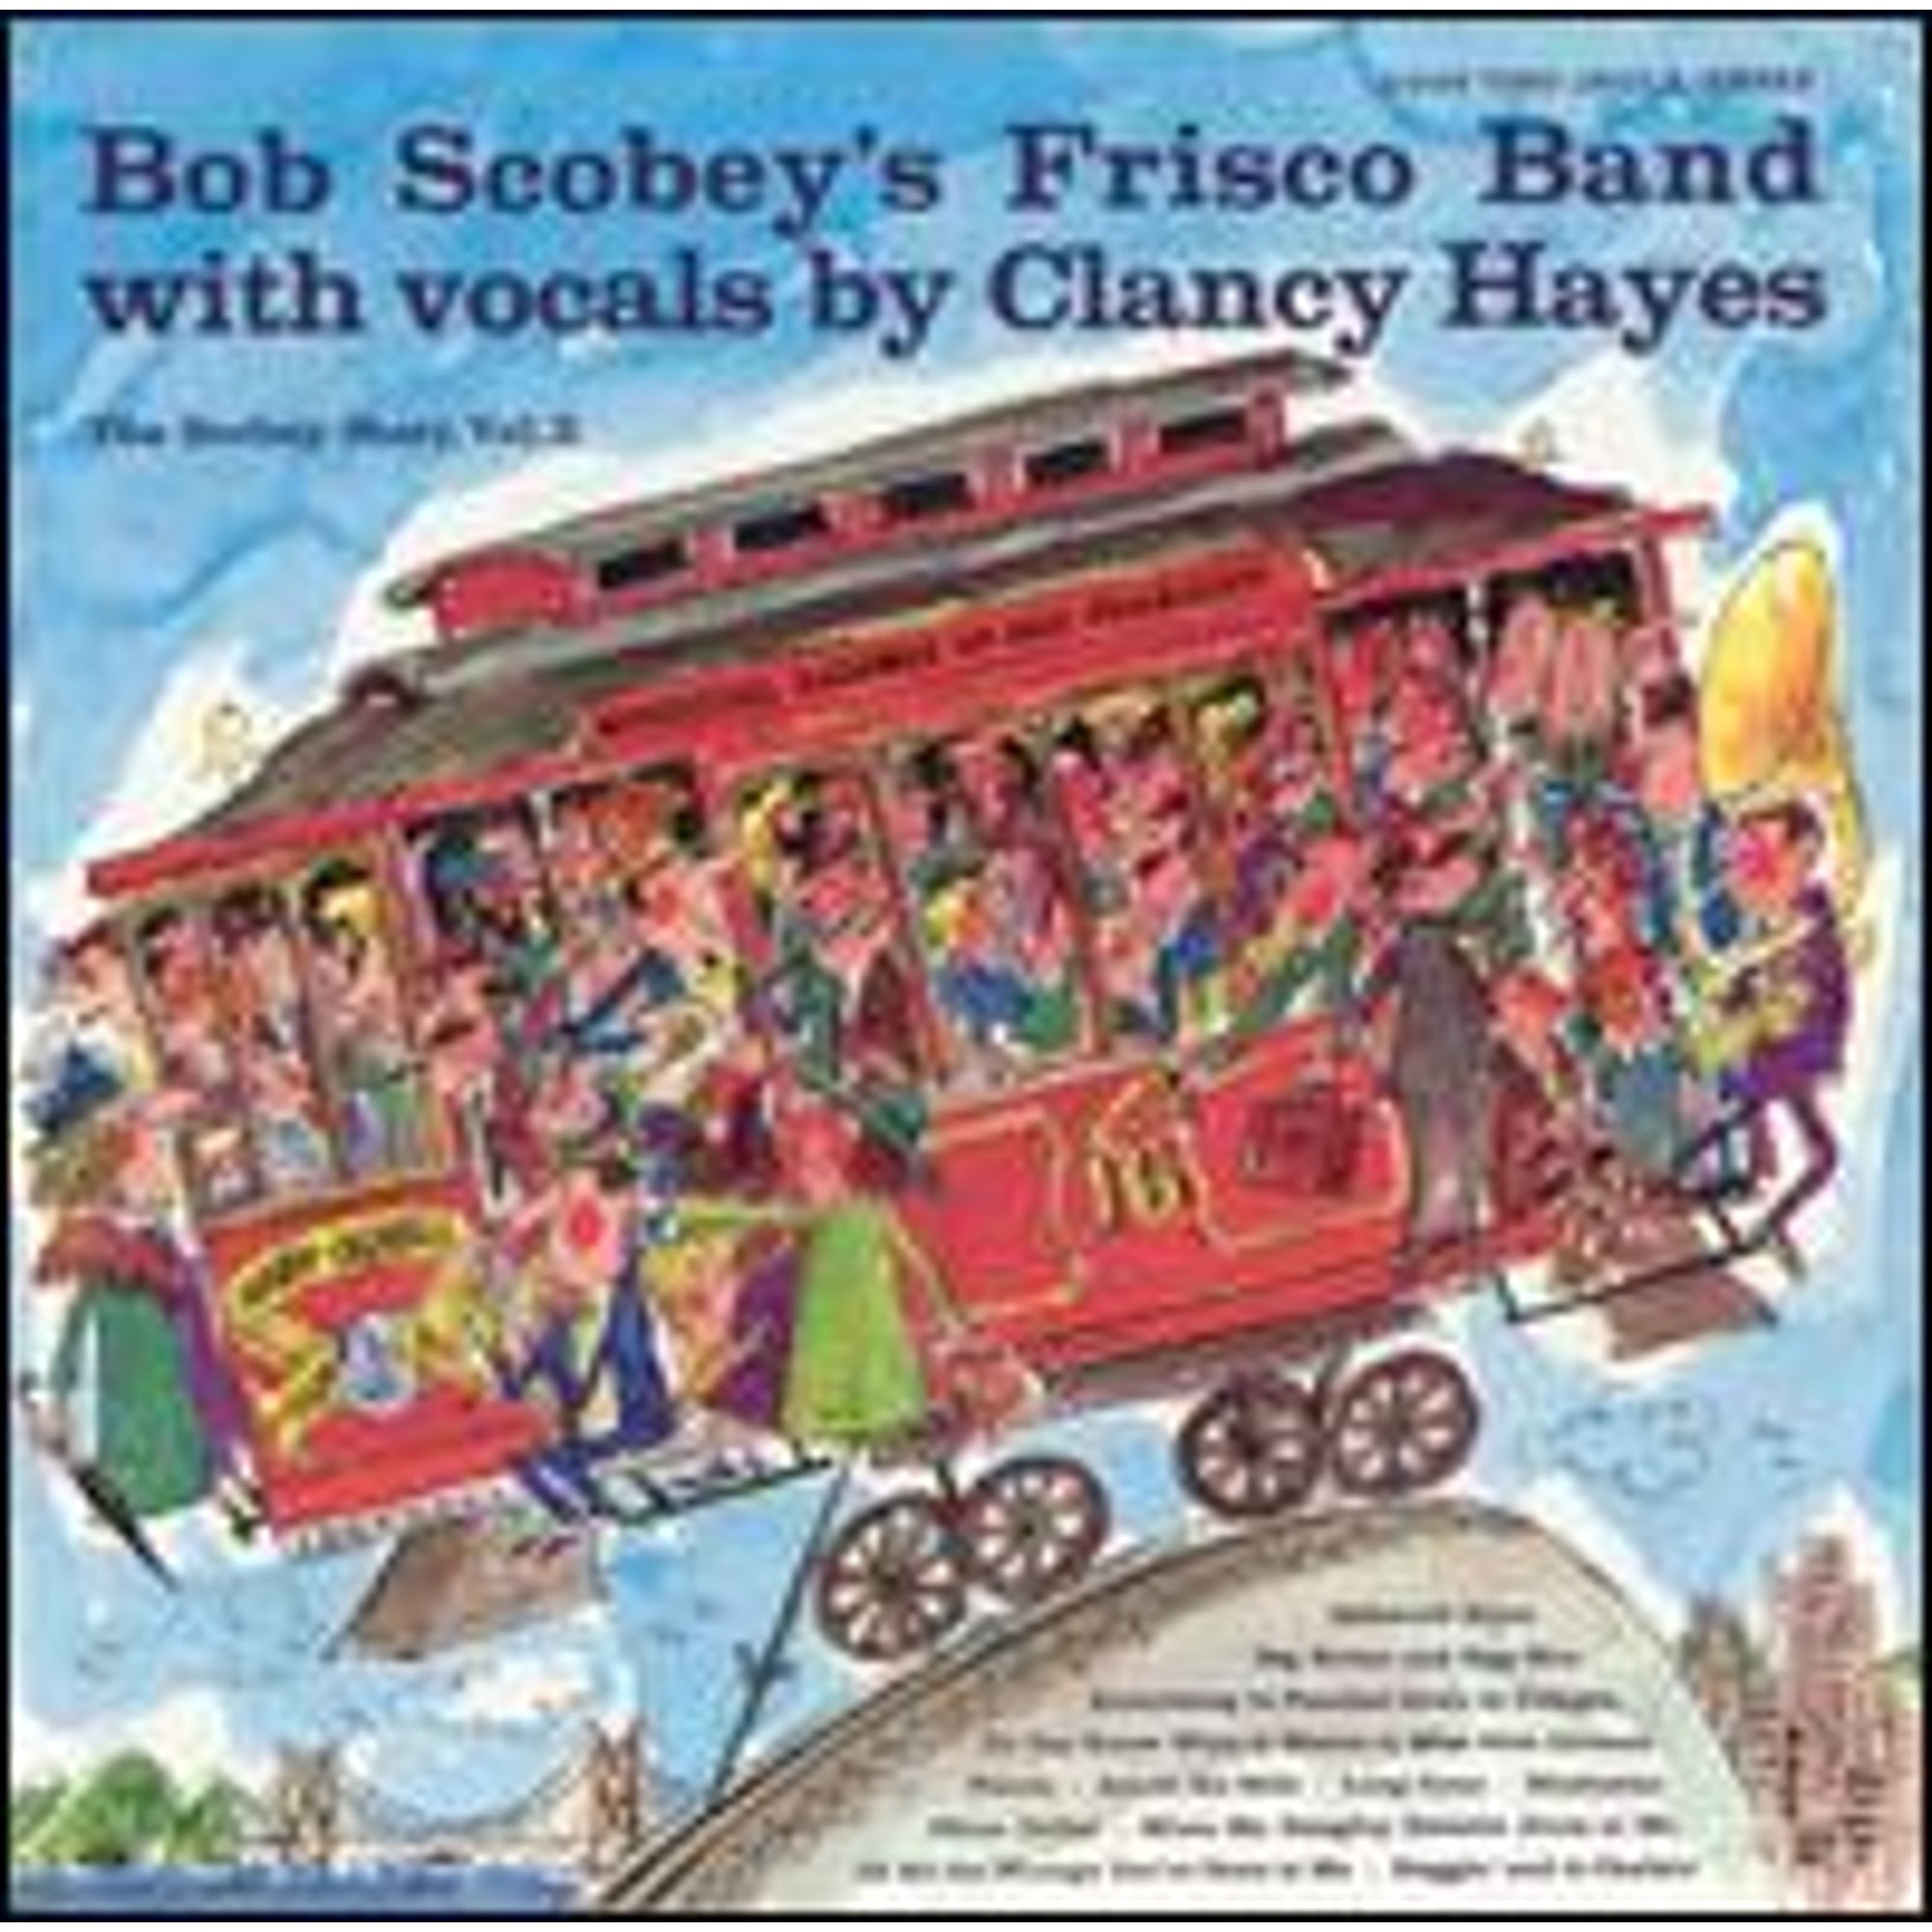 Pre-Owned The Scobey Story, Vol. 2 (CD 0025218123327) by Bob Scobey's Frisco Band